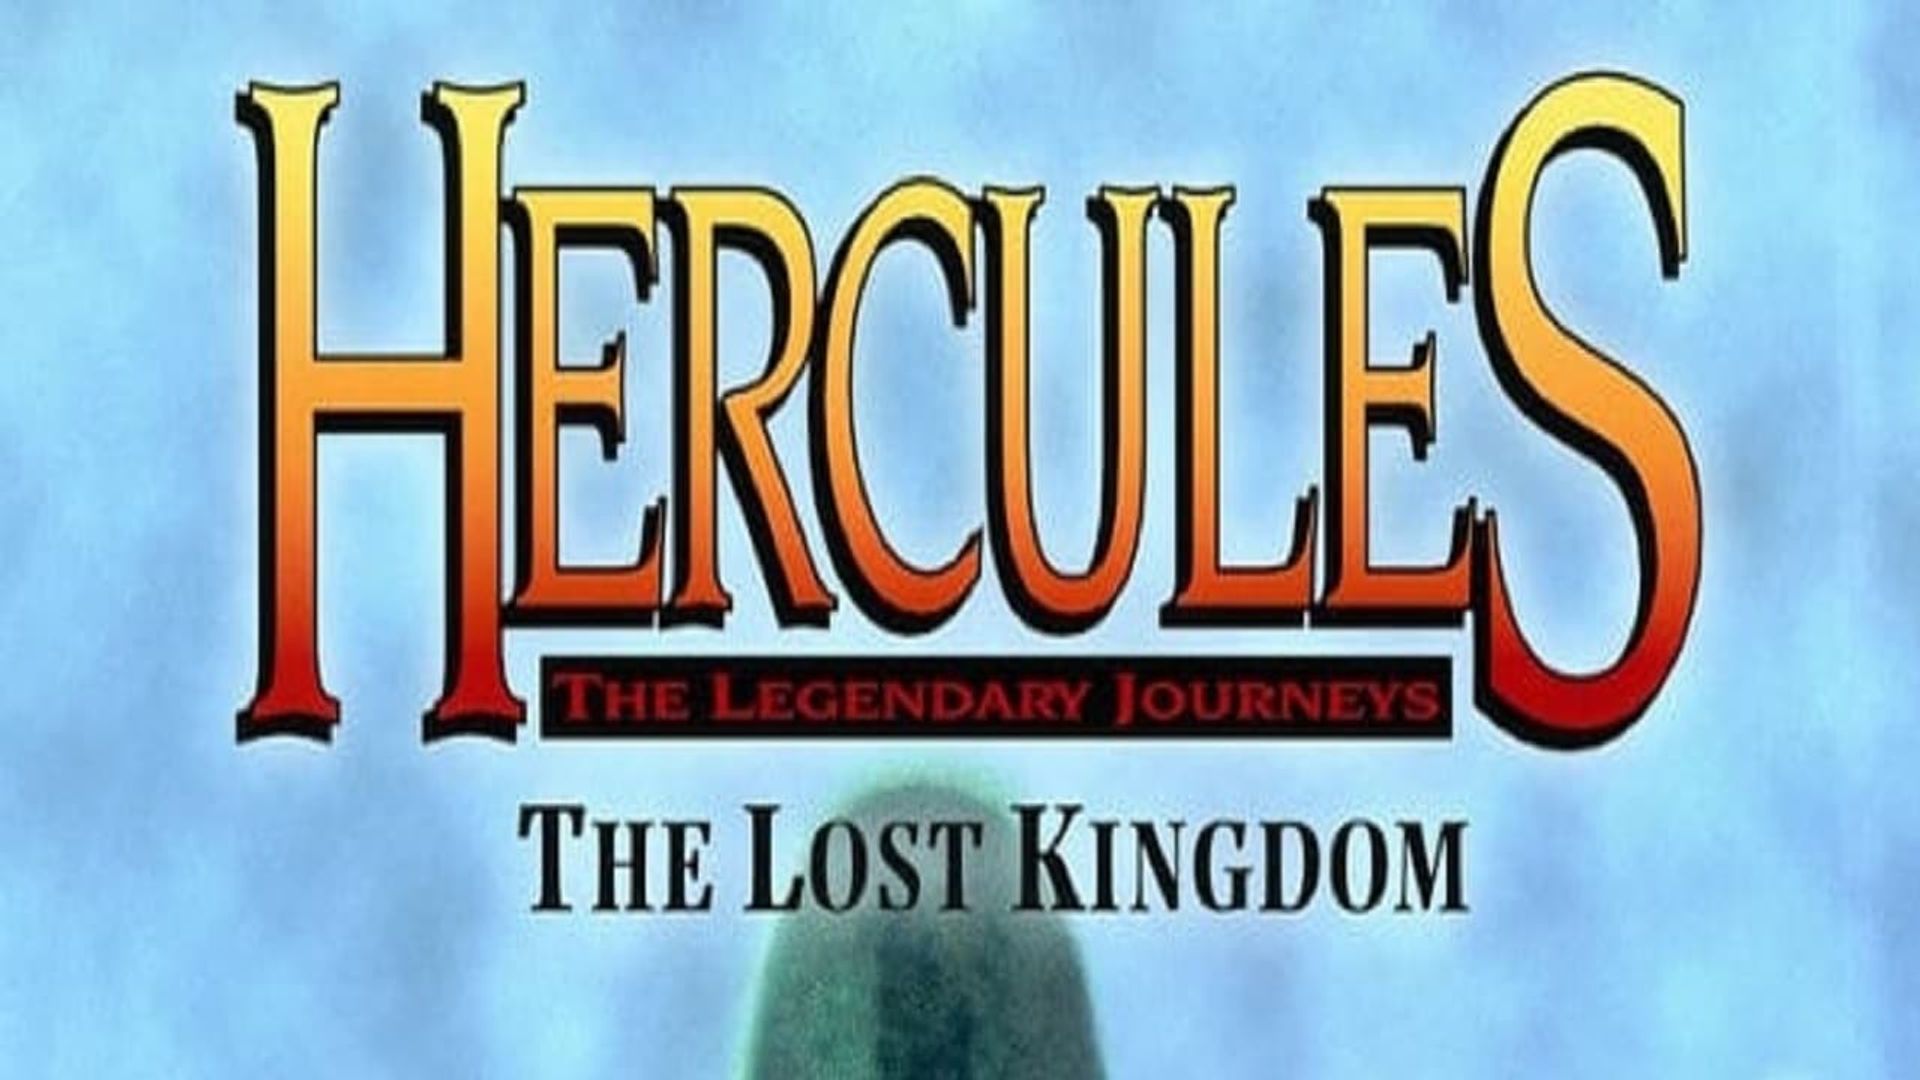 Hercules: The Legendary Journeys - Hercules and the Lost Kingdom background